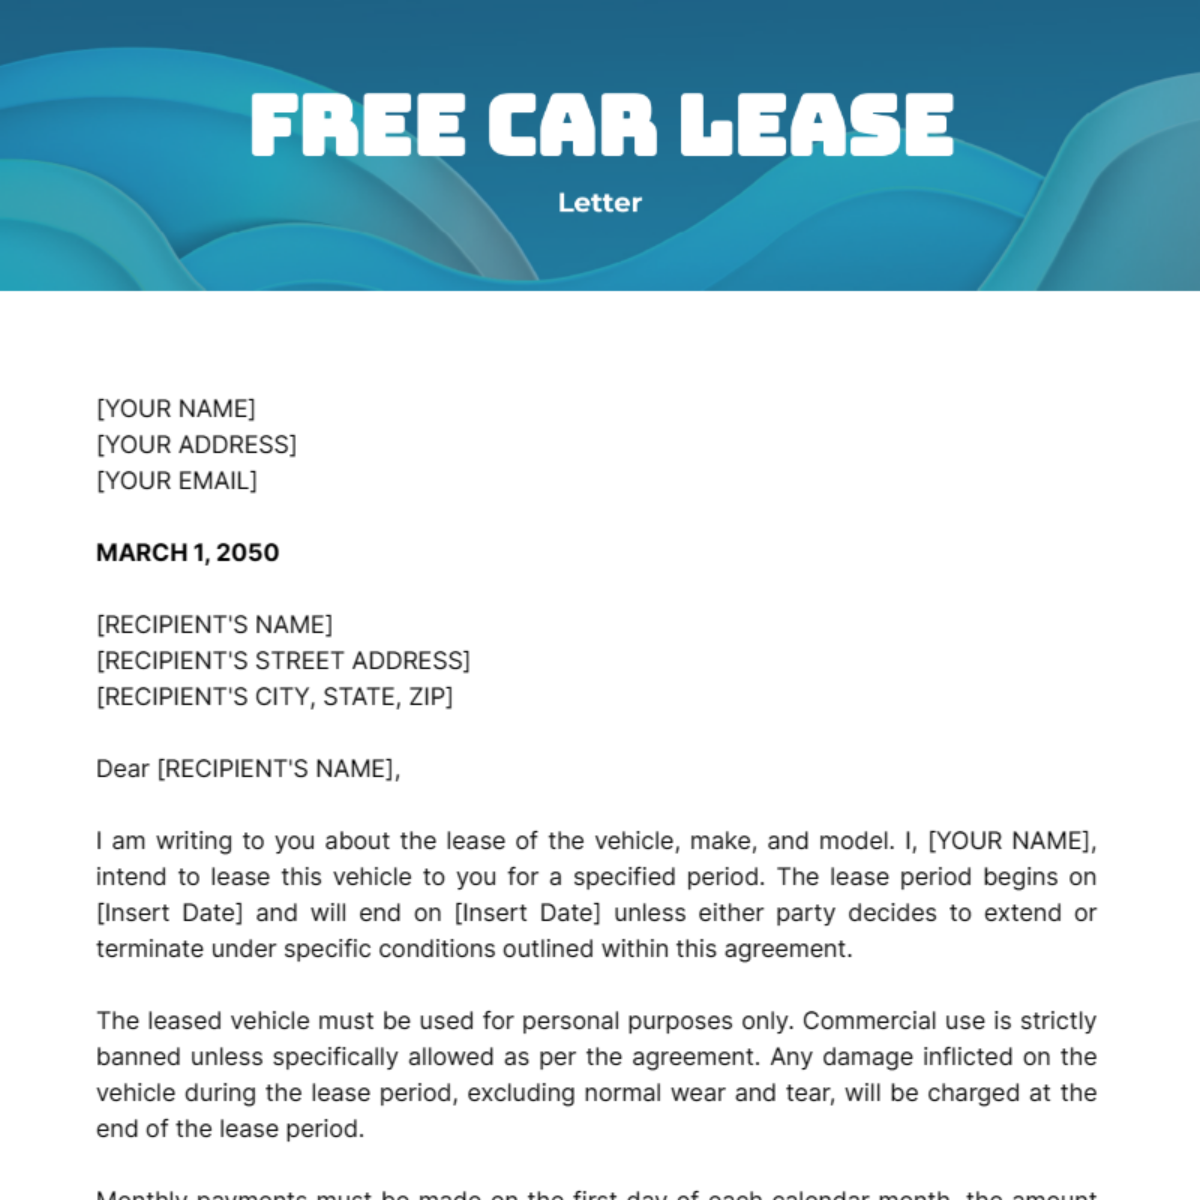 Car Lease Letter Template